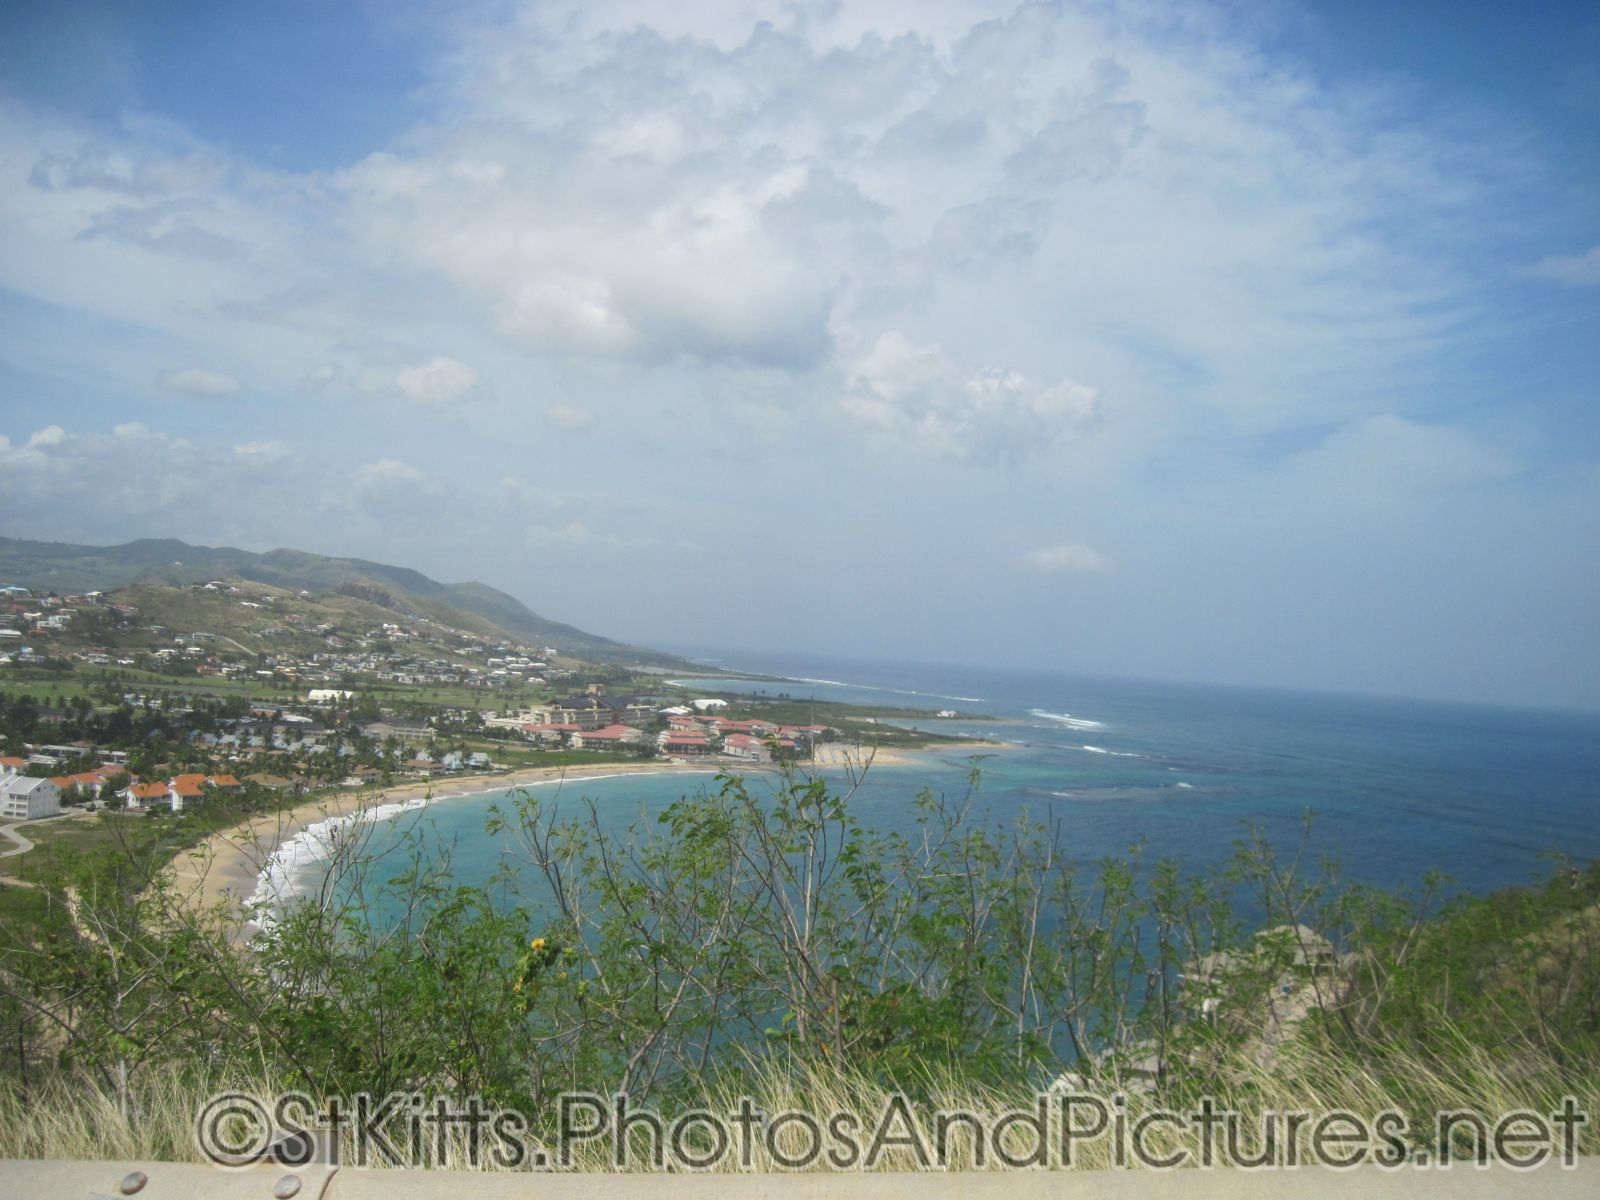 View of Frigate Bay from above in St Kitts.jpg
